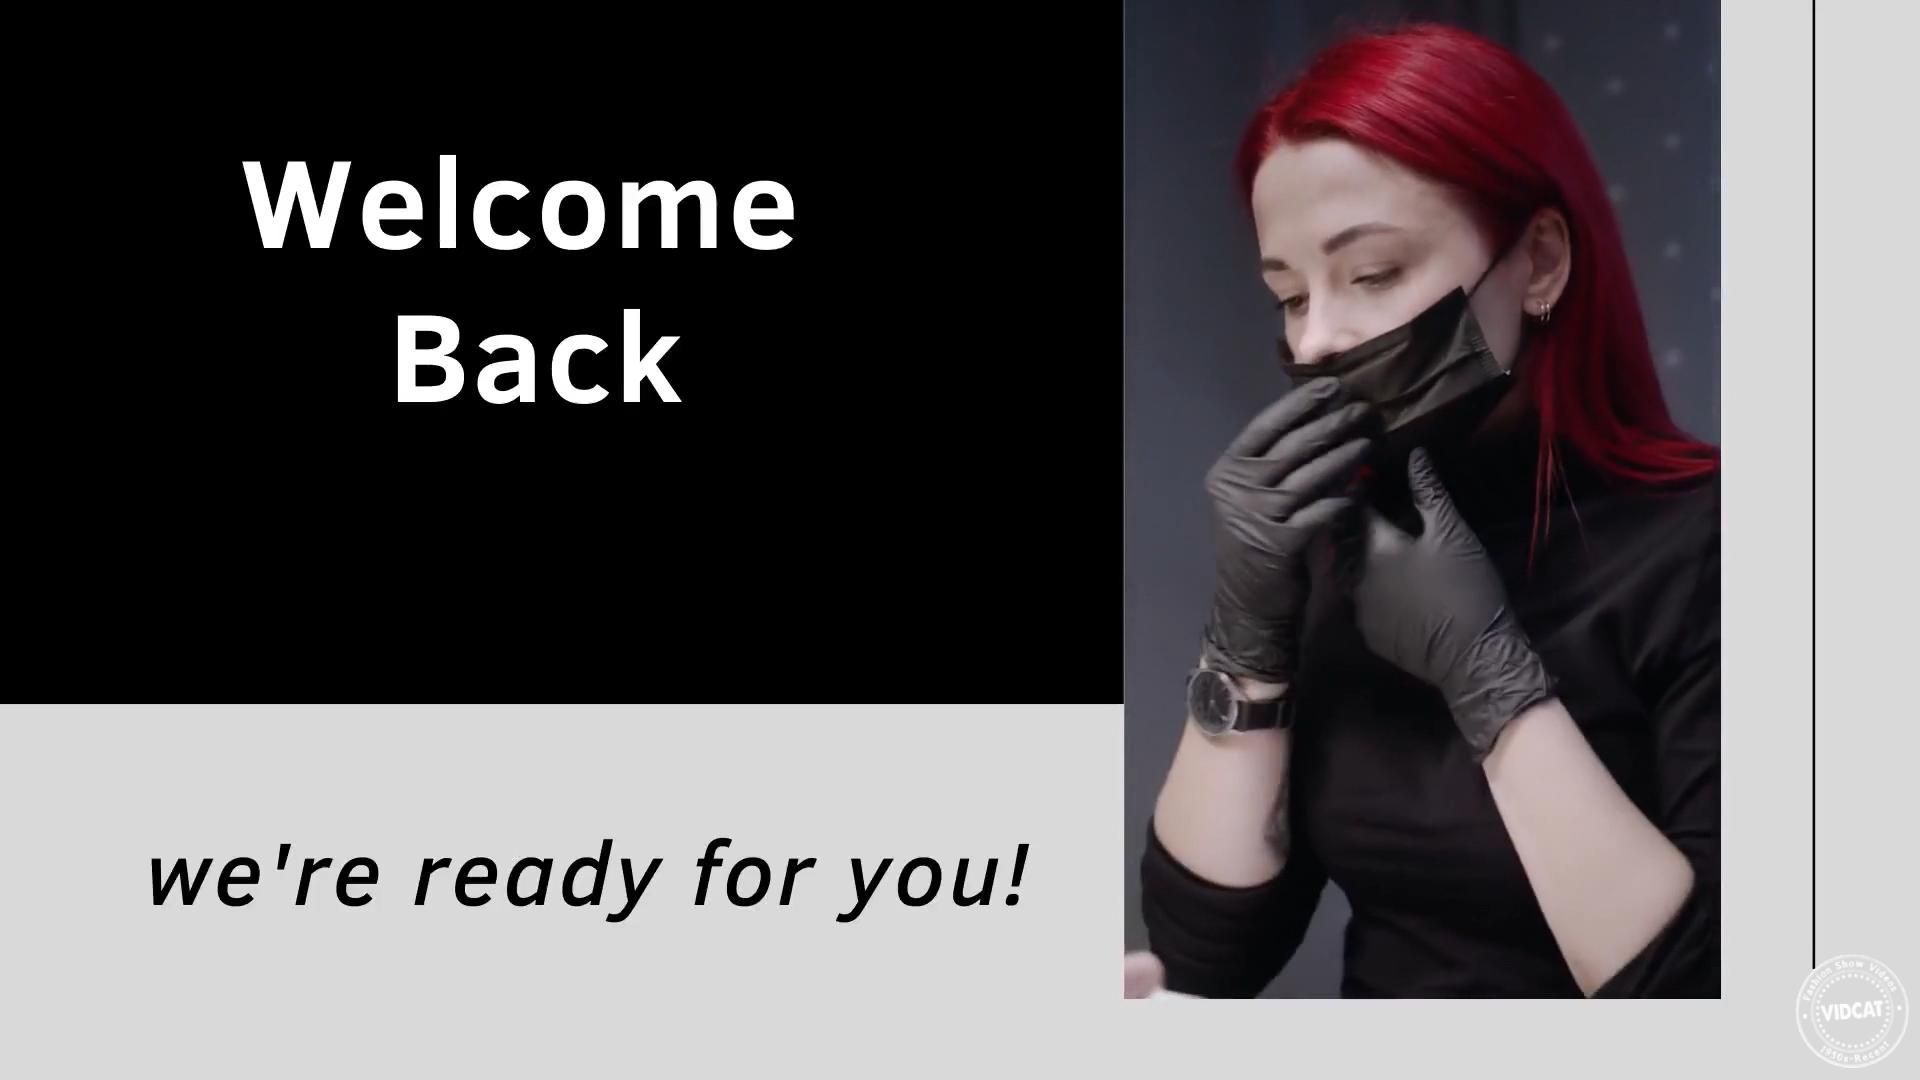 Welcome Back Video For Salons and Spas -   22 beauty Videos salon ideas